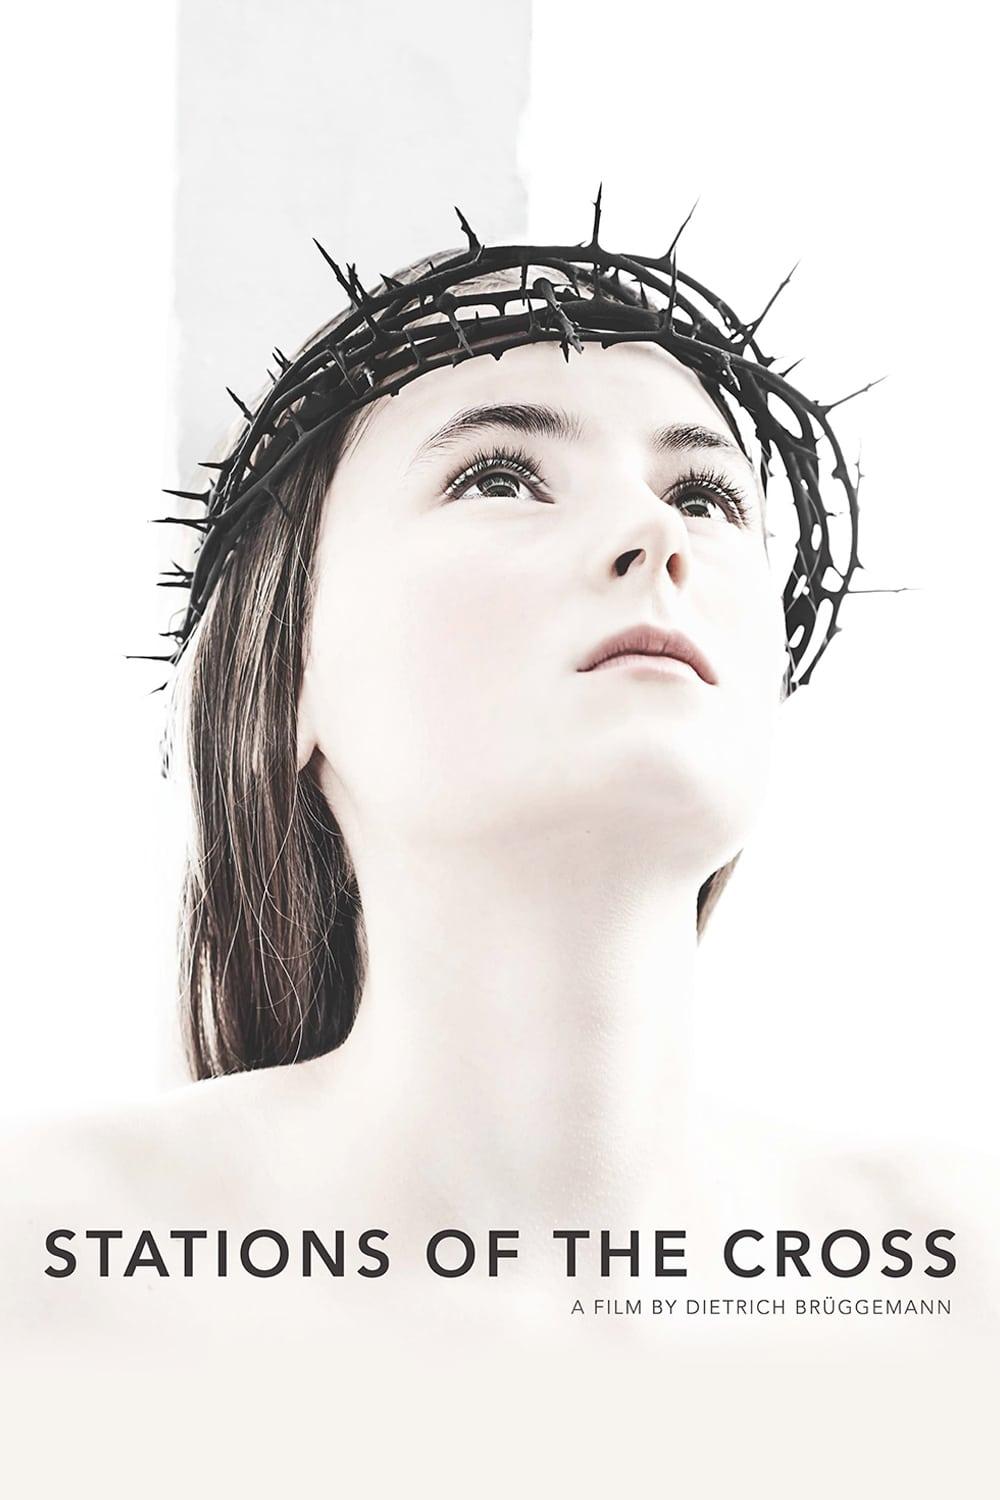 Stations of the Cross poster